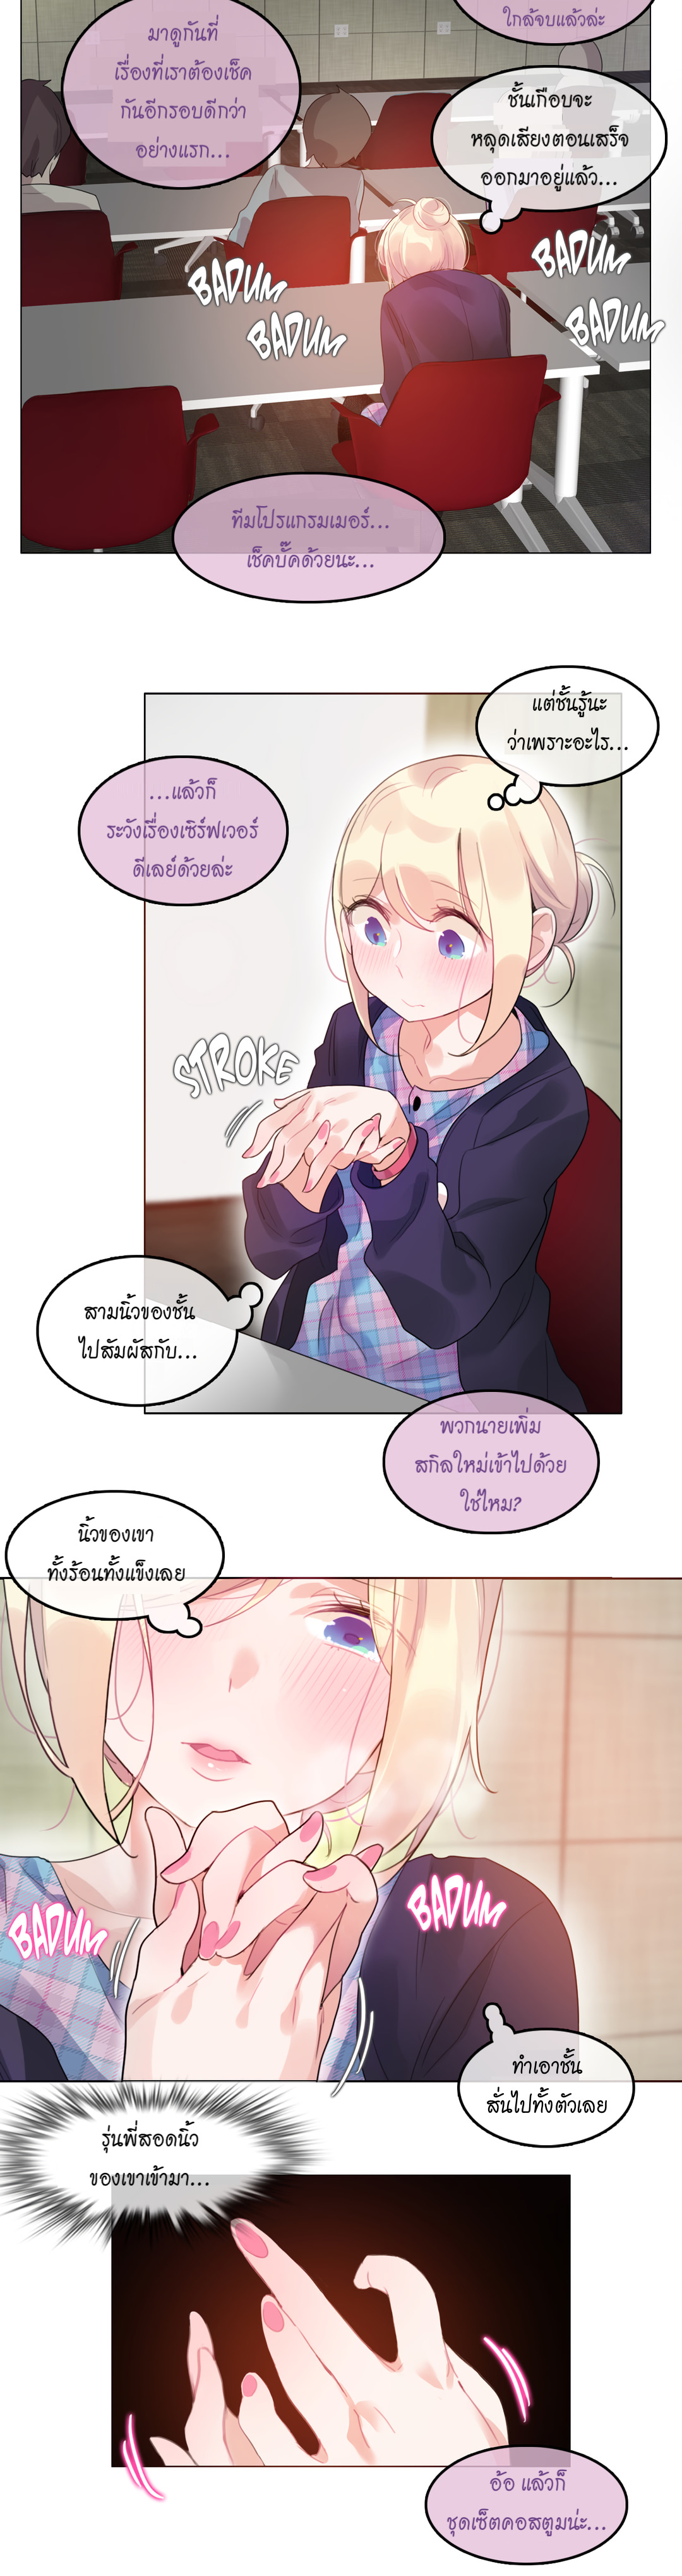 A Pervert’s Daily Life53 (10)